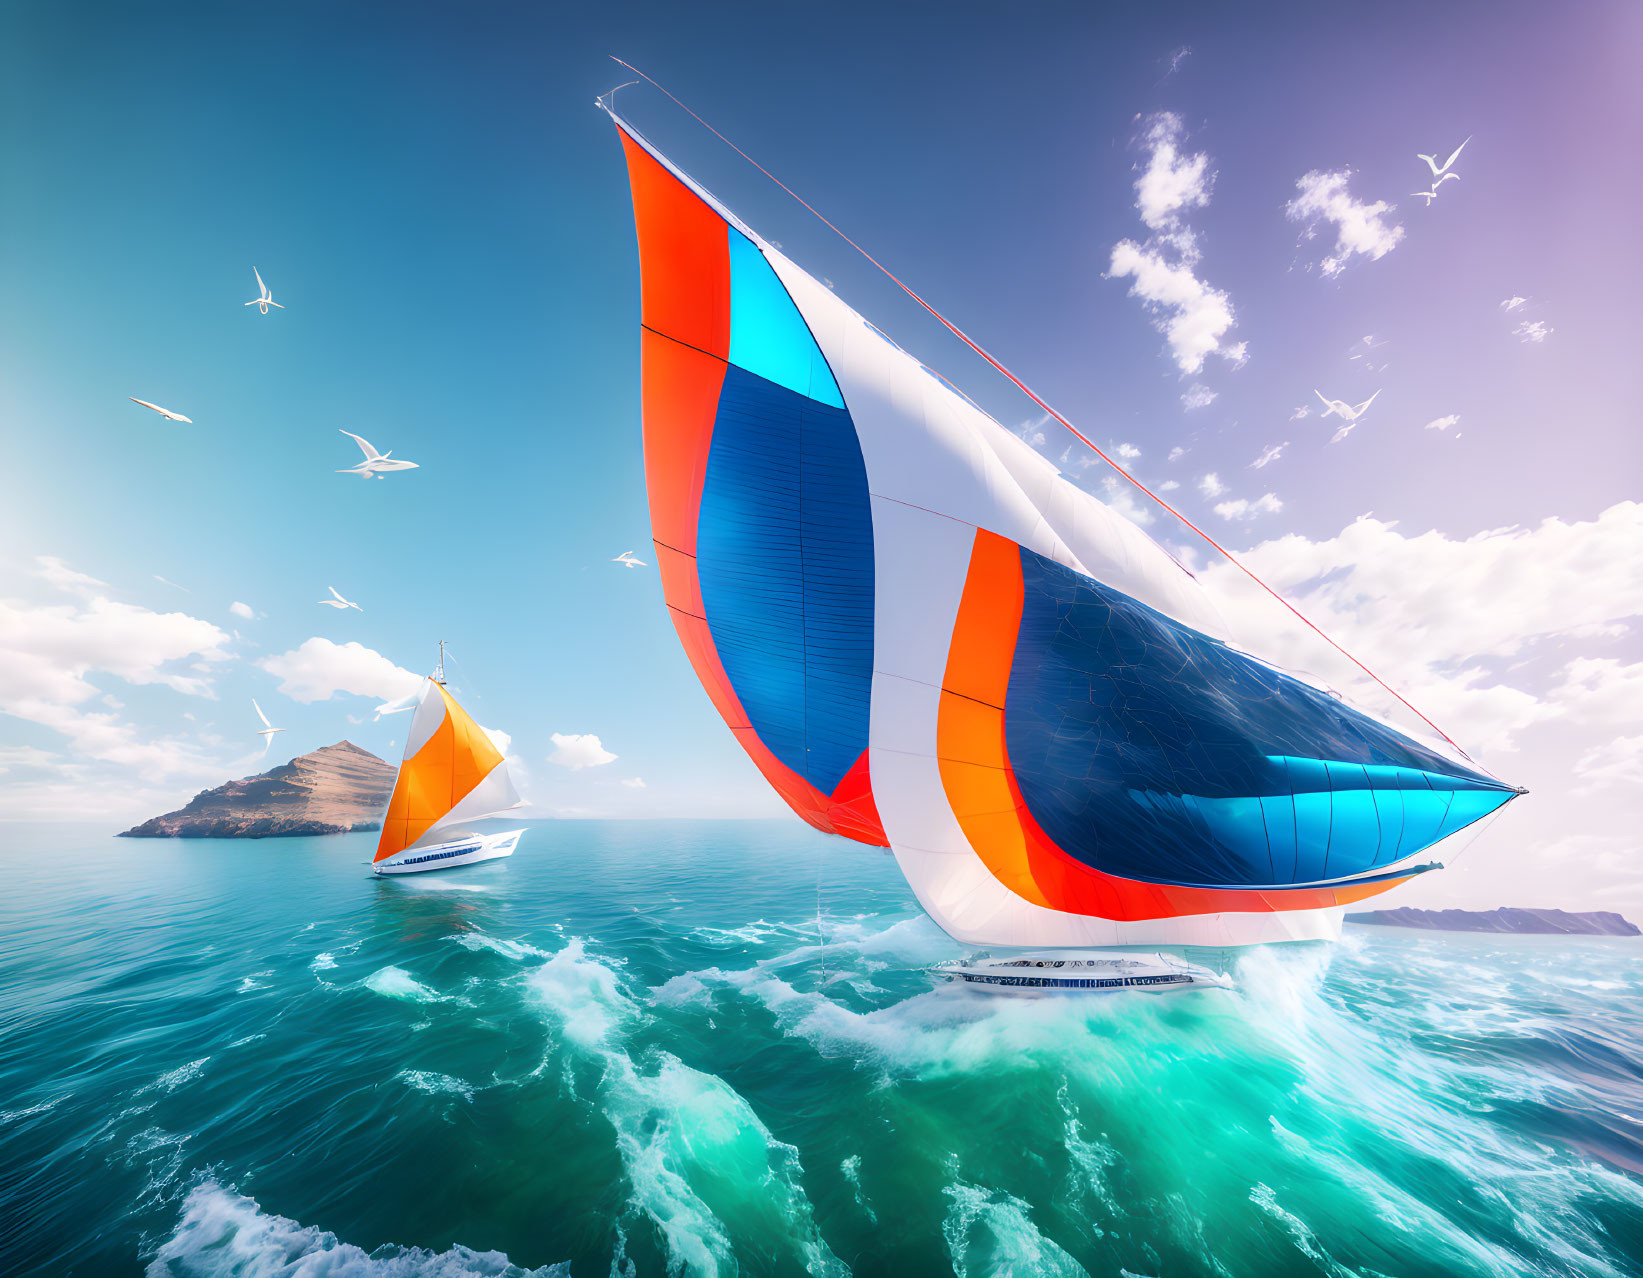 Colorful sailboats on blue ocean with sunny sky and seagulls